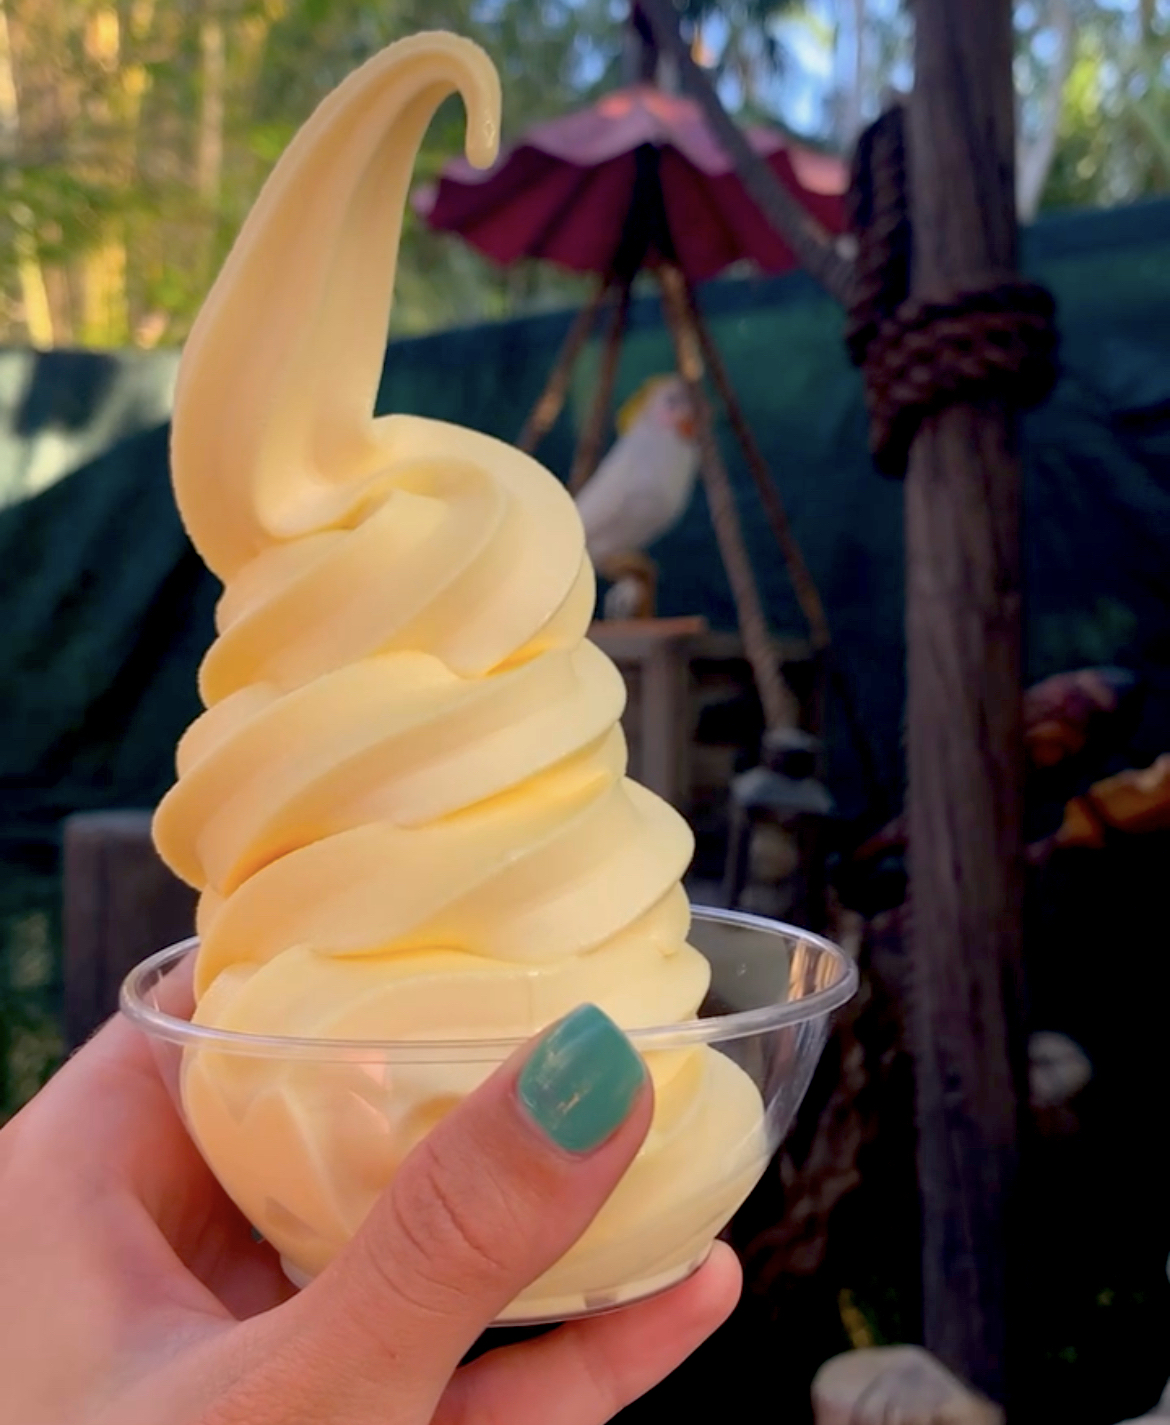 price increase on dole whip